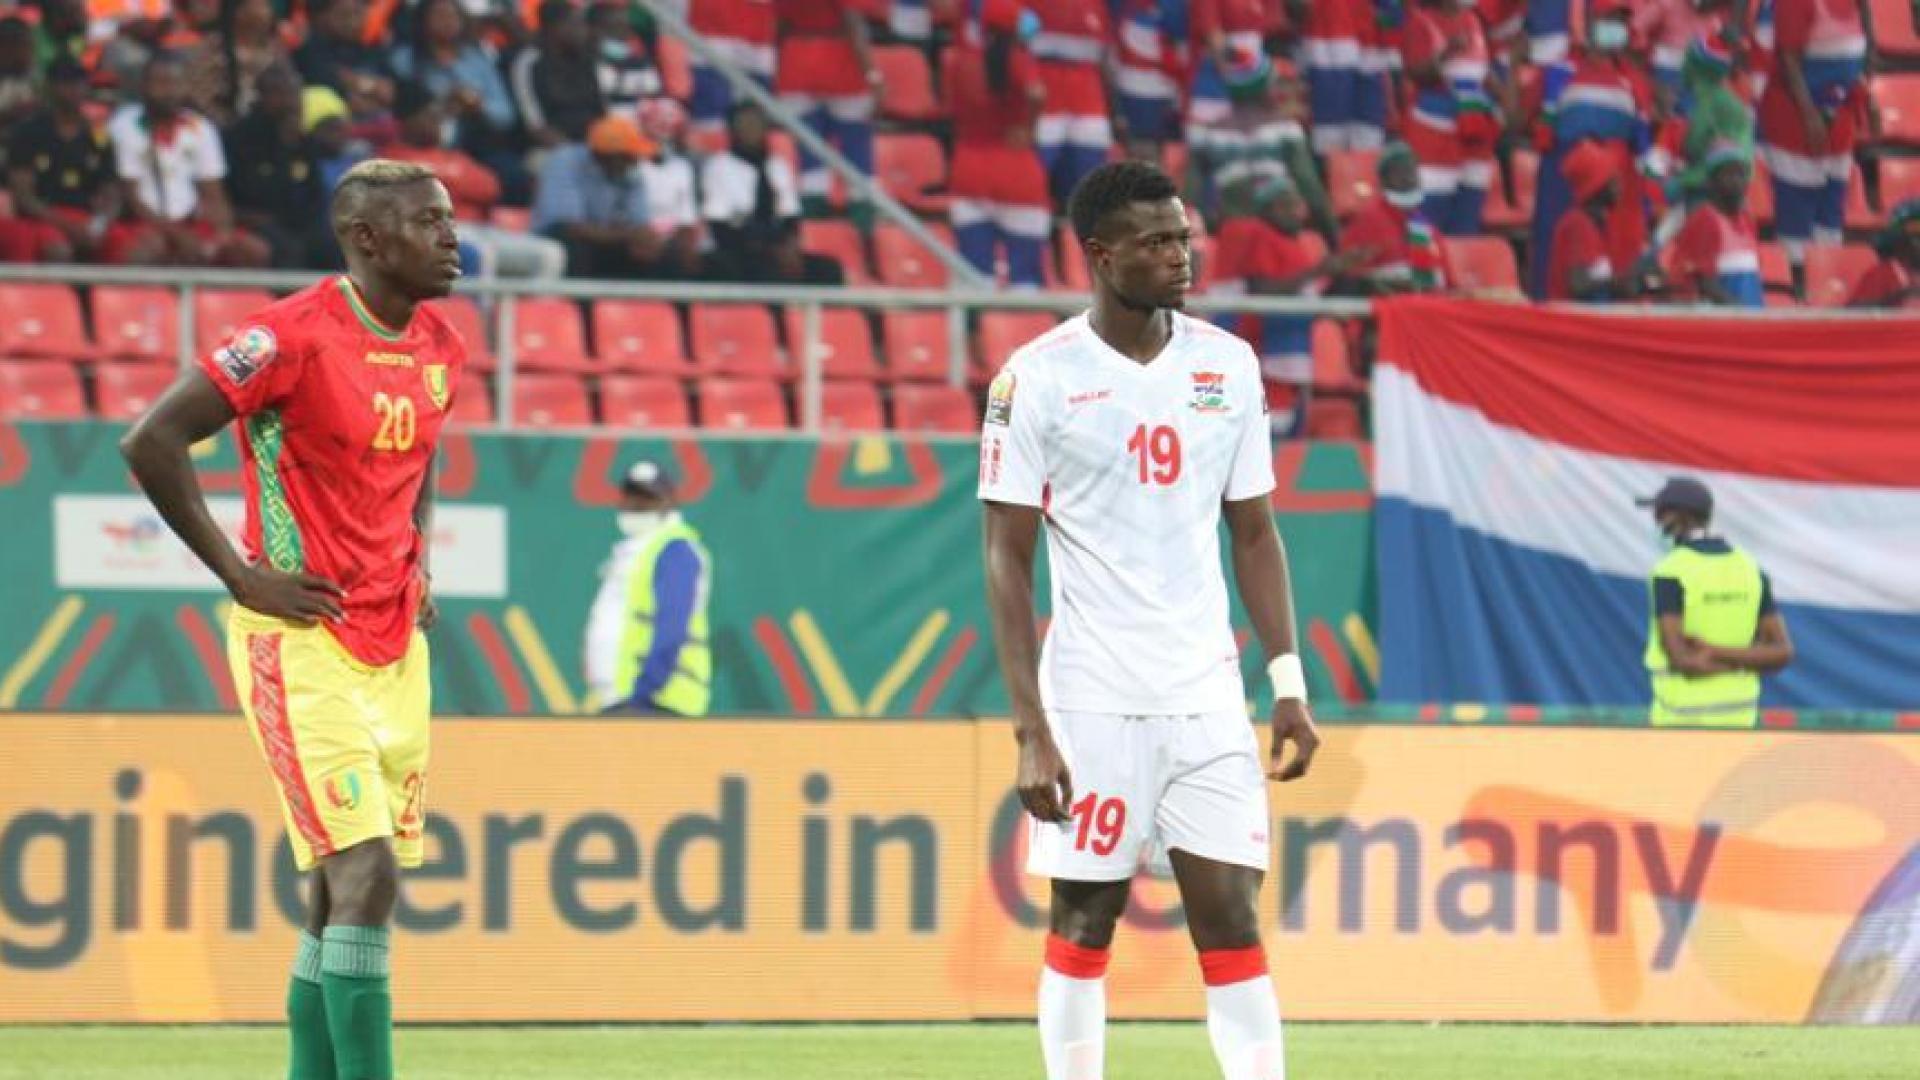 National teams: Colley's Gambia does well; Kiwior and Podgoreanu opponents